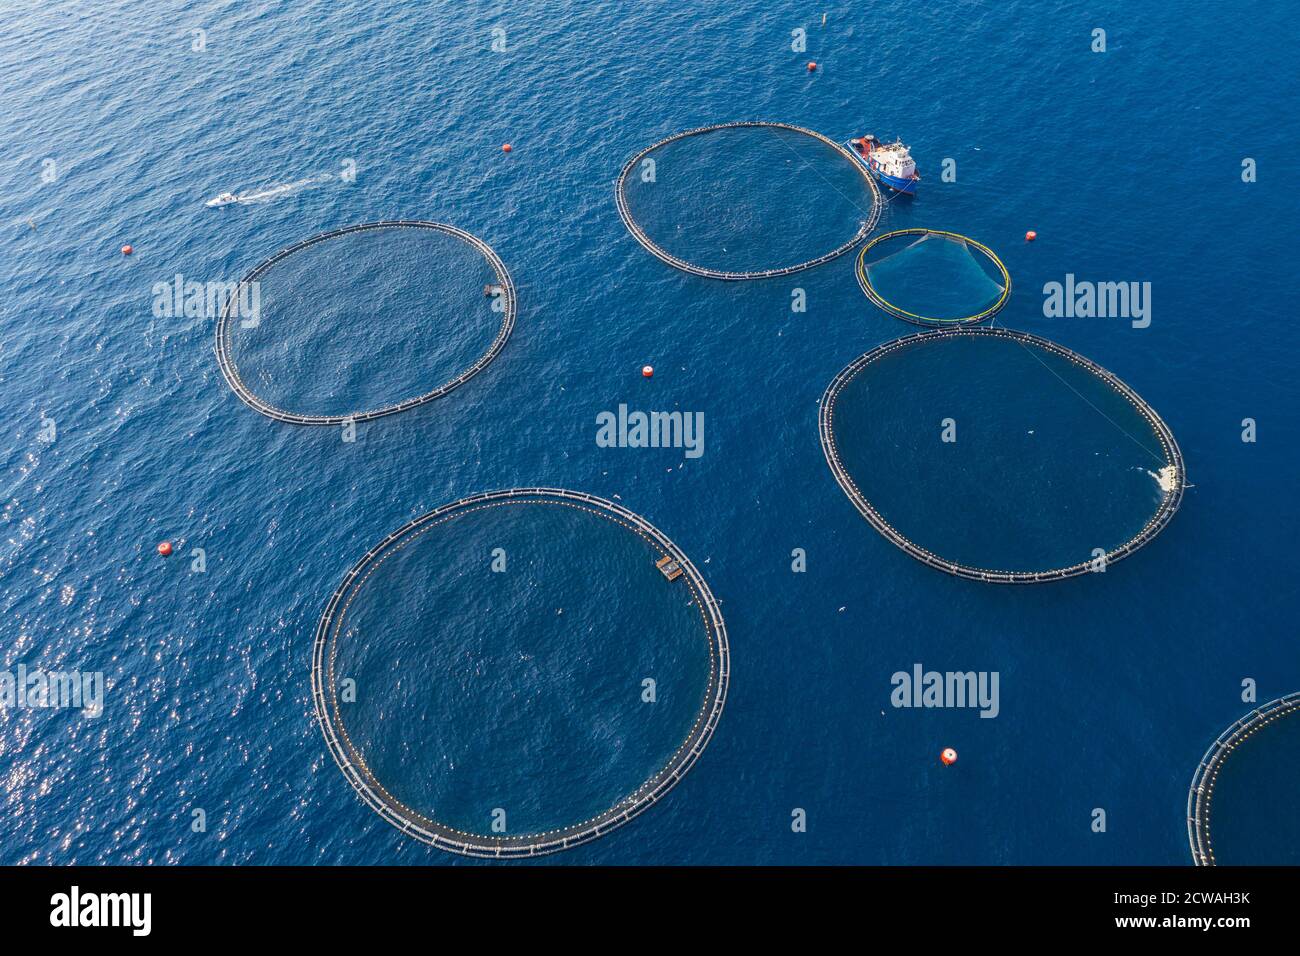 Fish farm from above Stock Photo